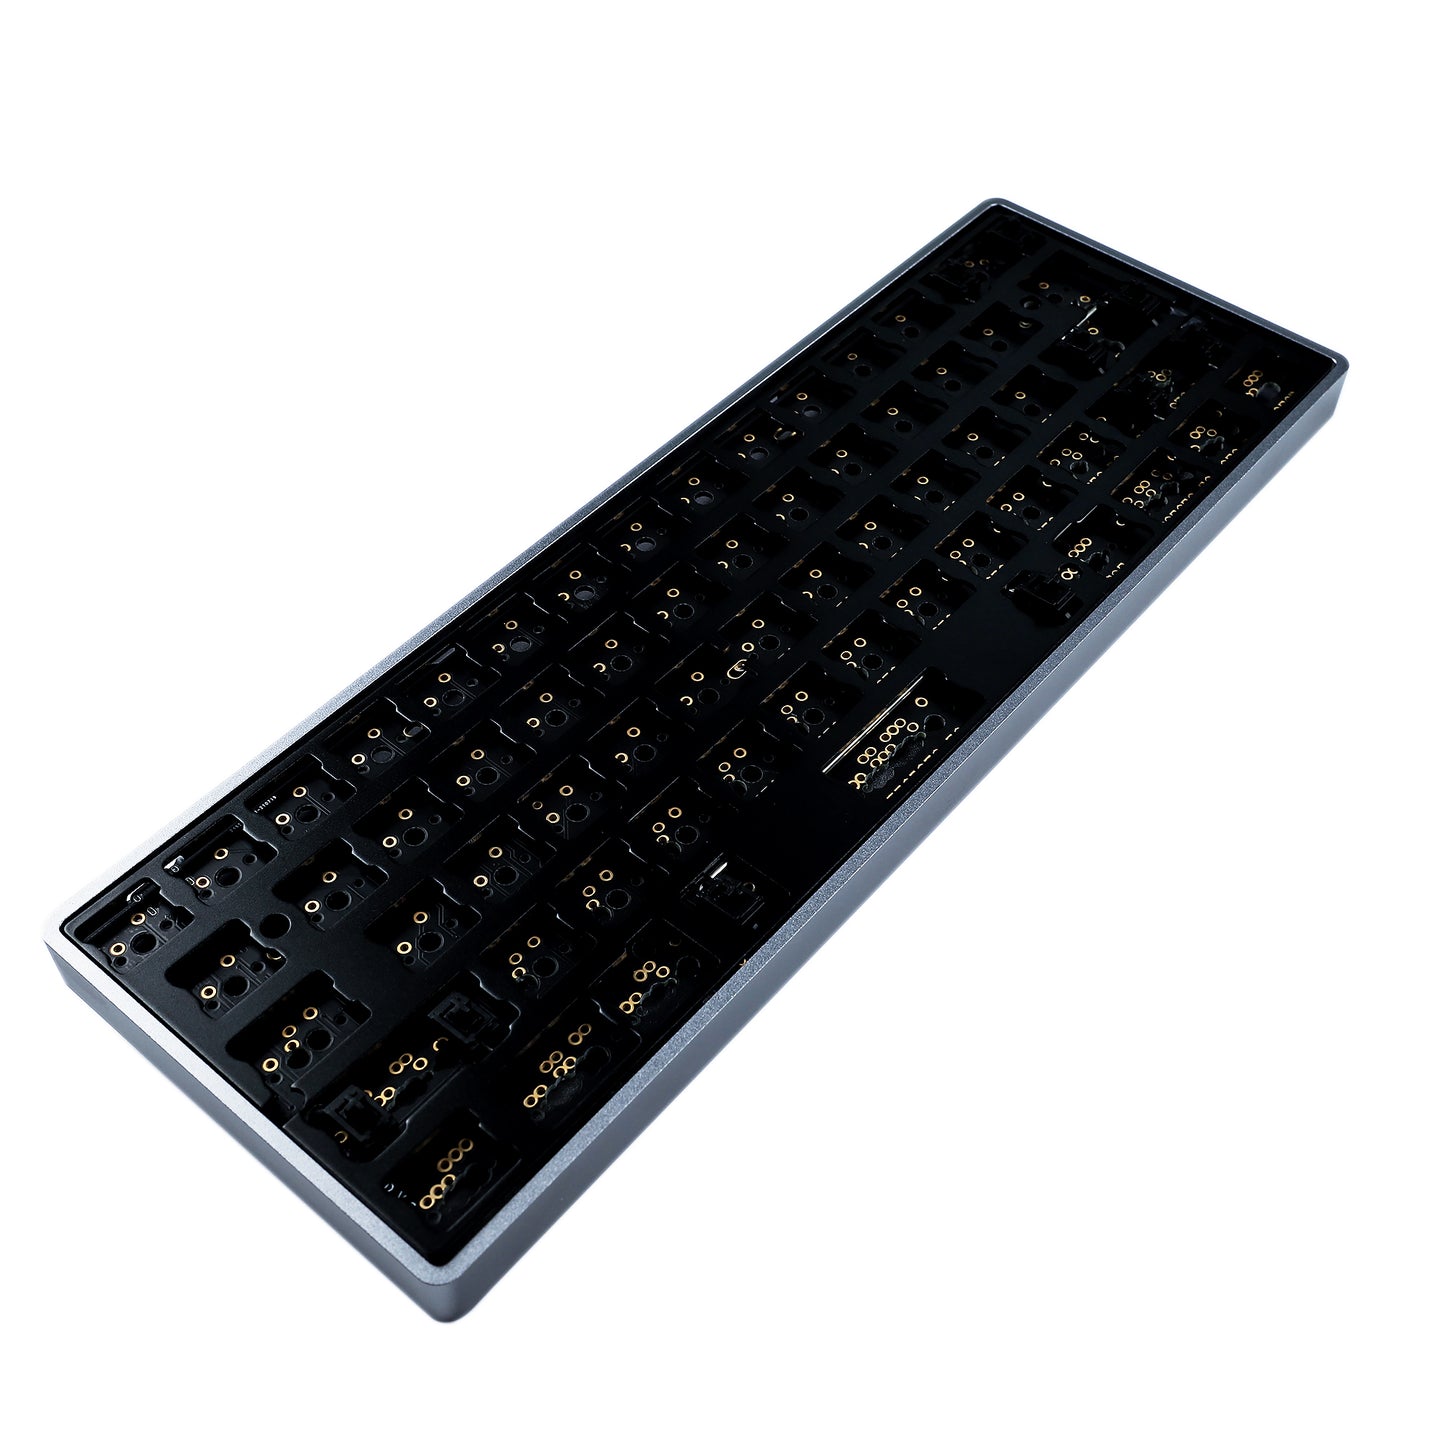 YMD-60% GH60 Light Aluminum Case Kit(QMK Soldering Supported/ANSI ISO Multi-Layout Supported)